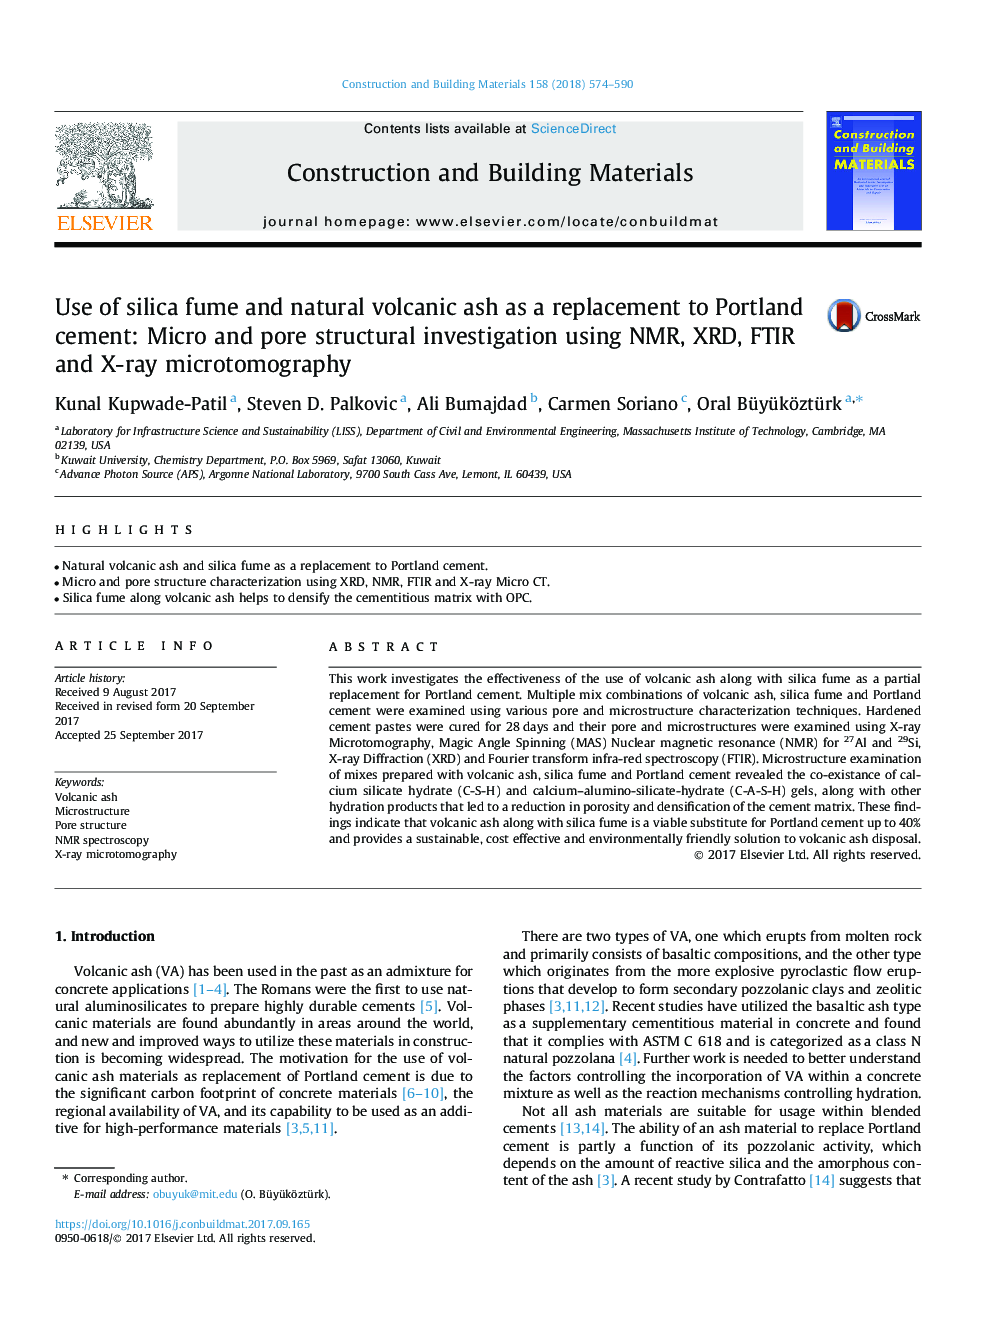 Use of silica fume and natural volcanic ash as a replacement to Portland cement: Micro and pore structural investigation using NMR, XRD, FTIR and X-ray microtomography